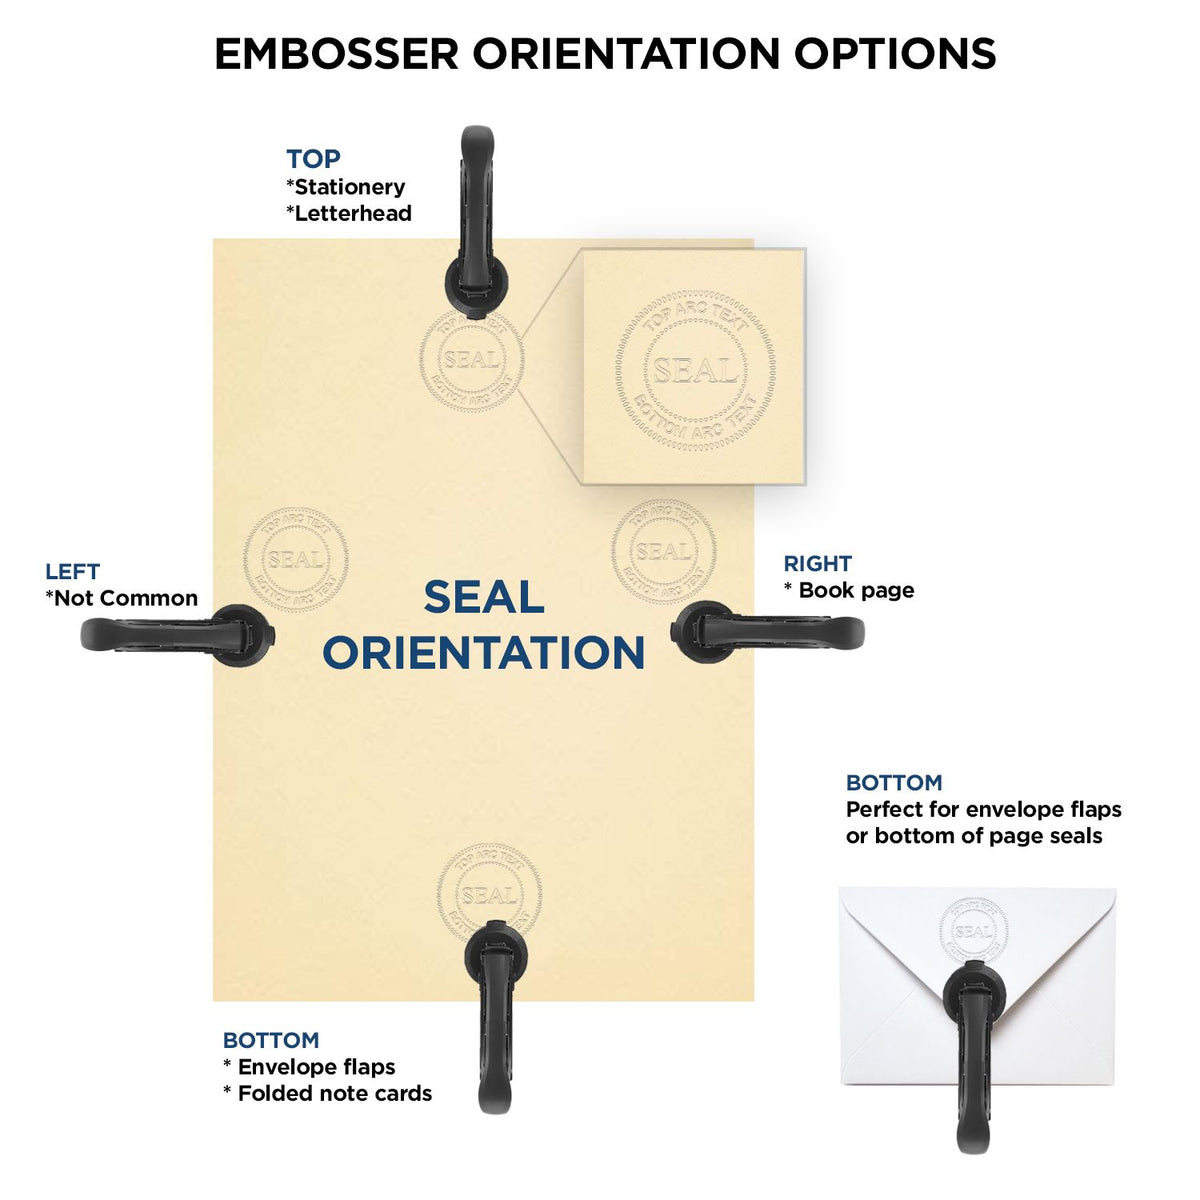 An infographic for the Handheld Montana Land Surveyor Seal showing embosser orientation, this is showing examples of a top, bottom, right and left insert.